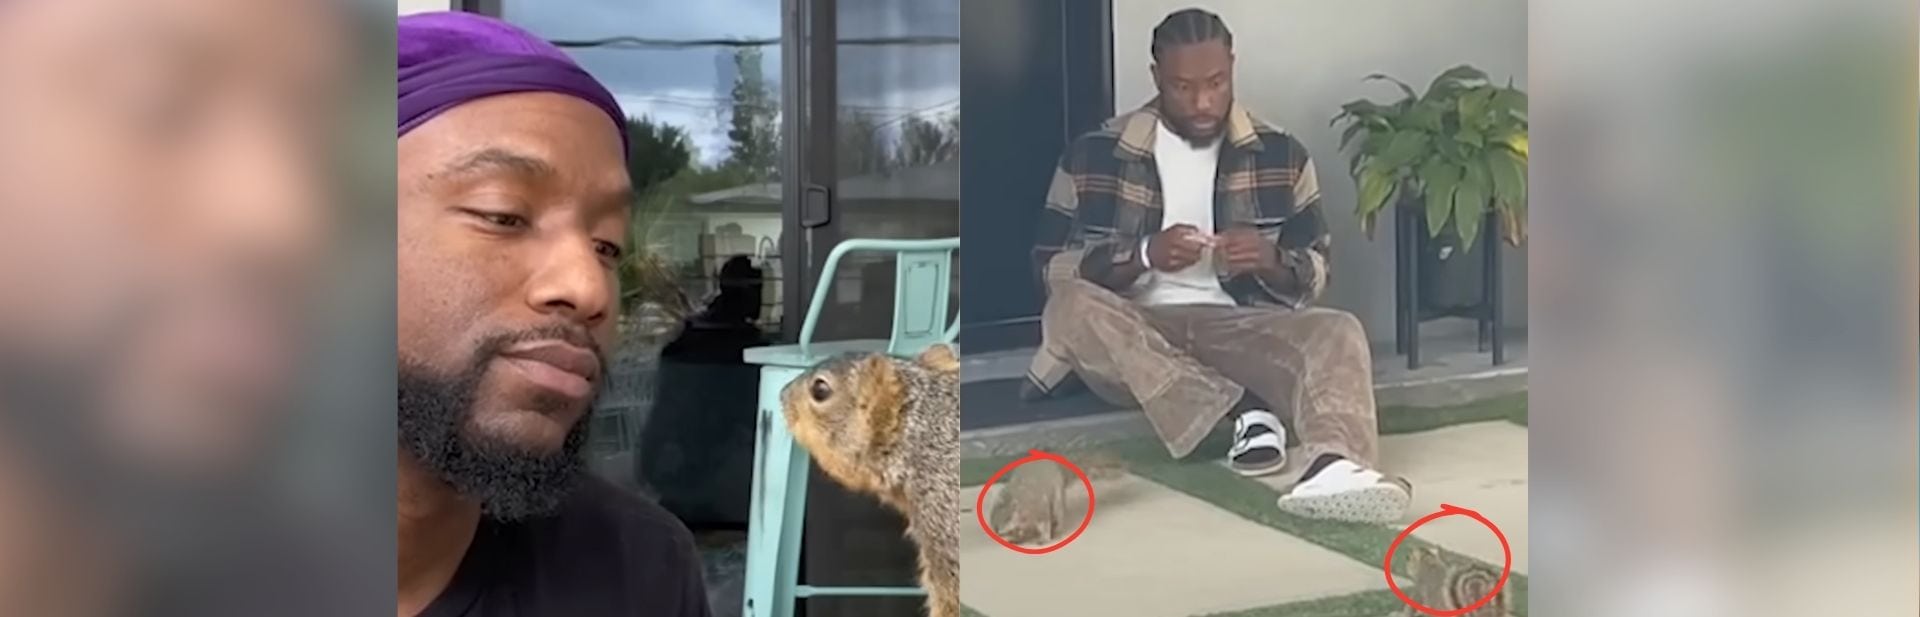 Los Angeles Man Befriends Balcony Squirrel and Becomes an Internet Sensation